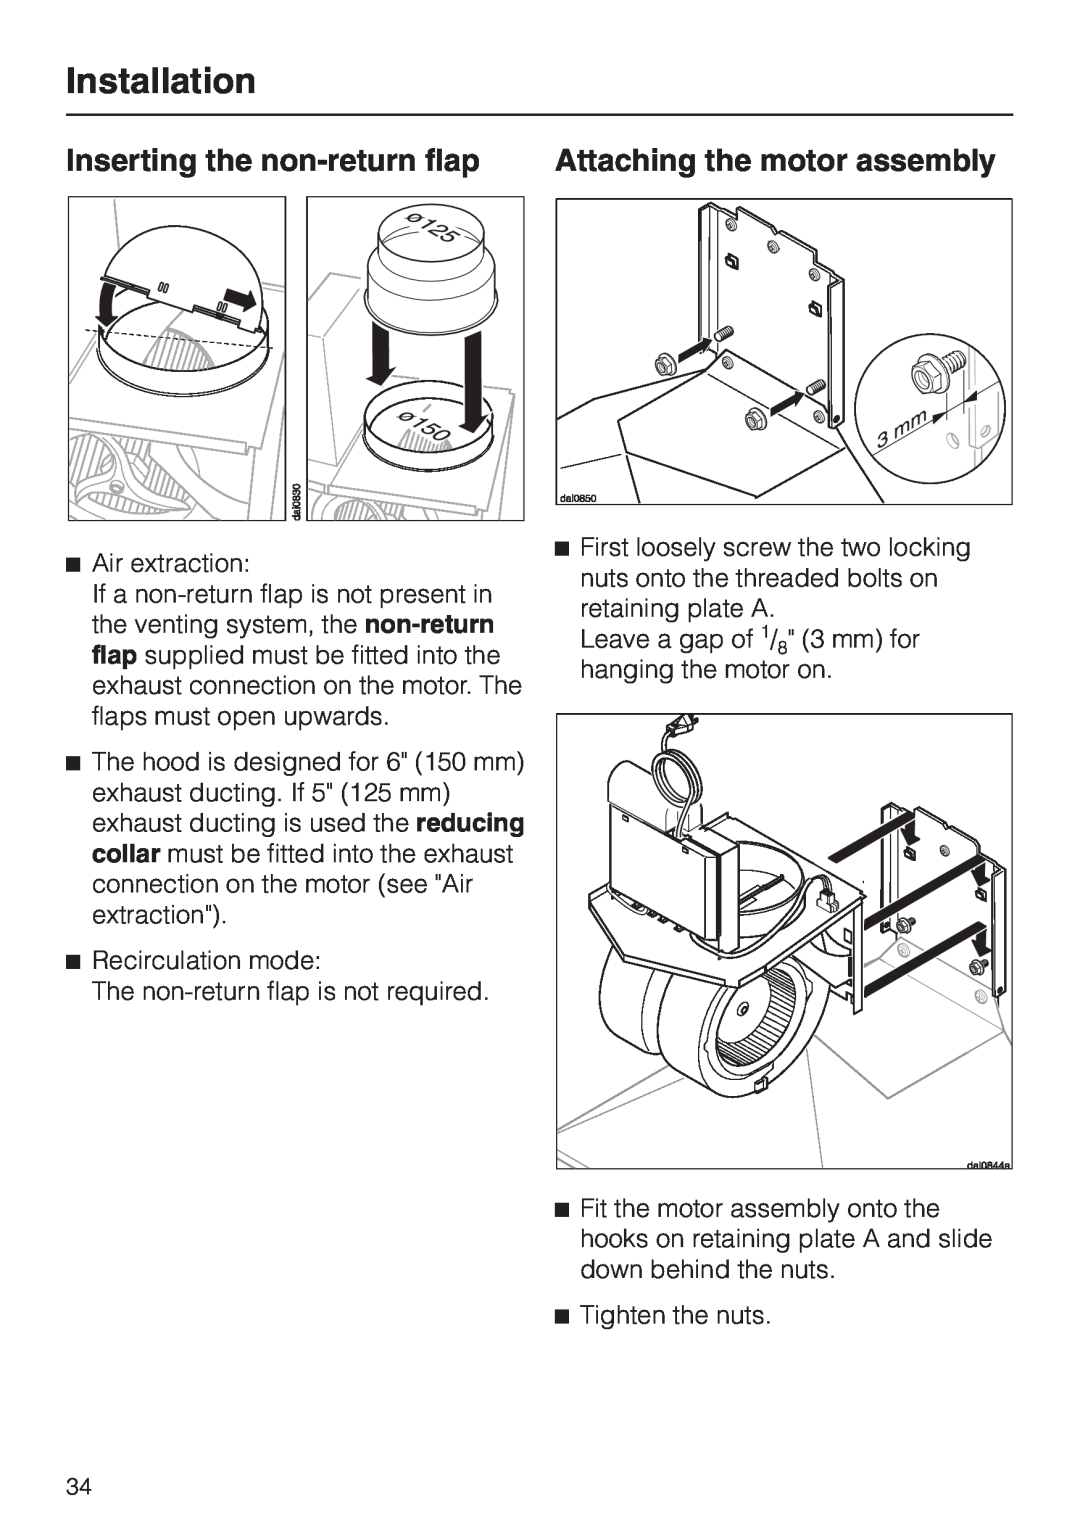 Miele DA218, DA211 installation instructions Inserting the non-returnflap, Attaching the motor assembly, Installation 